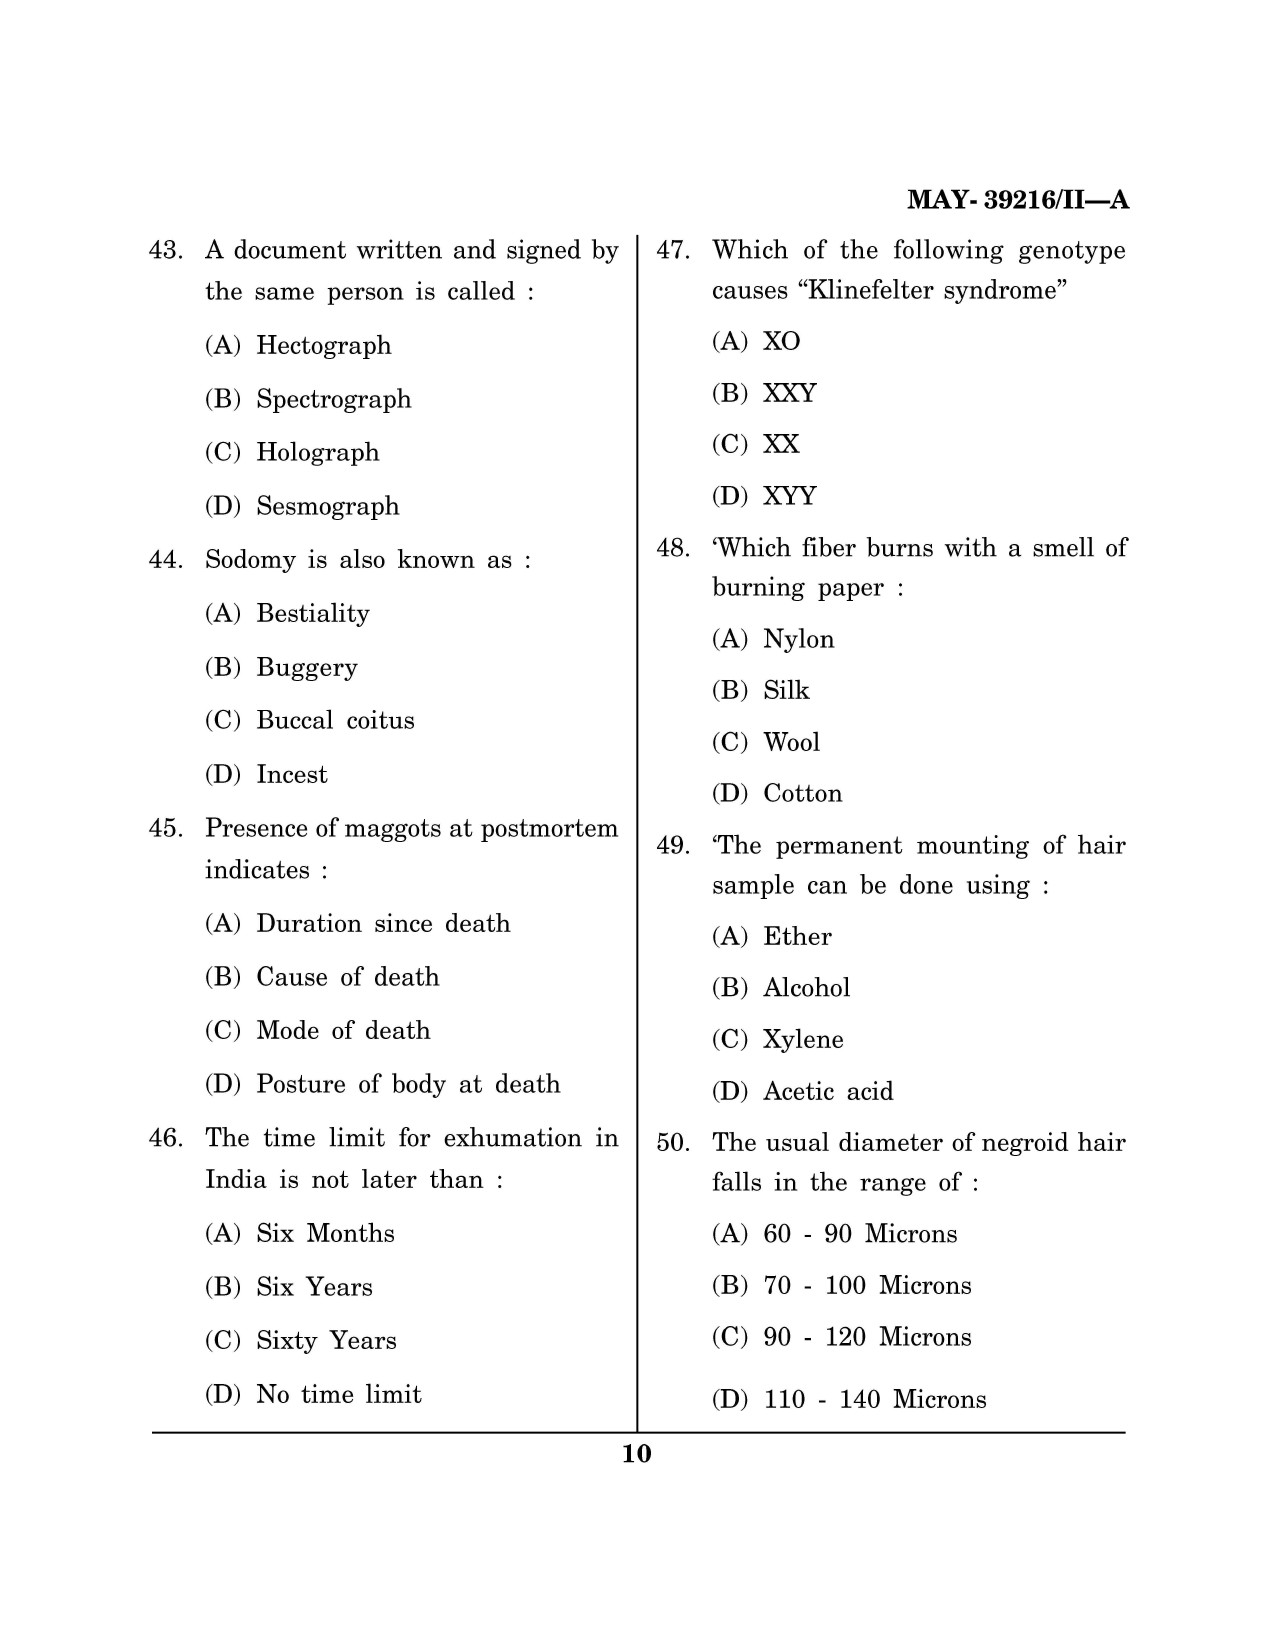 Maharashtra SET Forensic Science Question Paper II May 2016 9